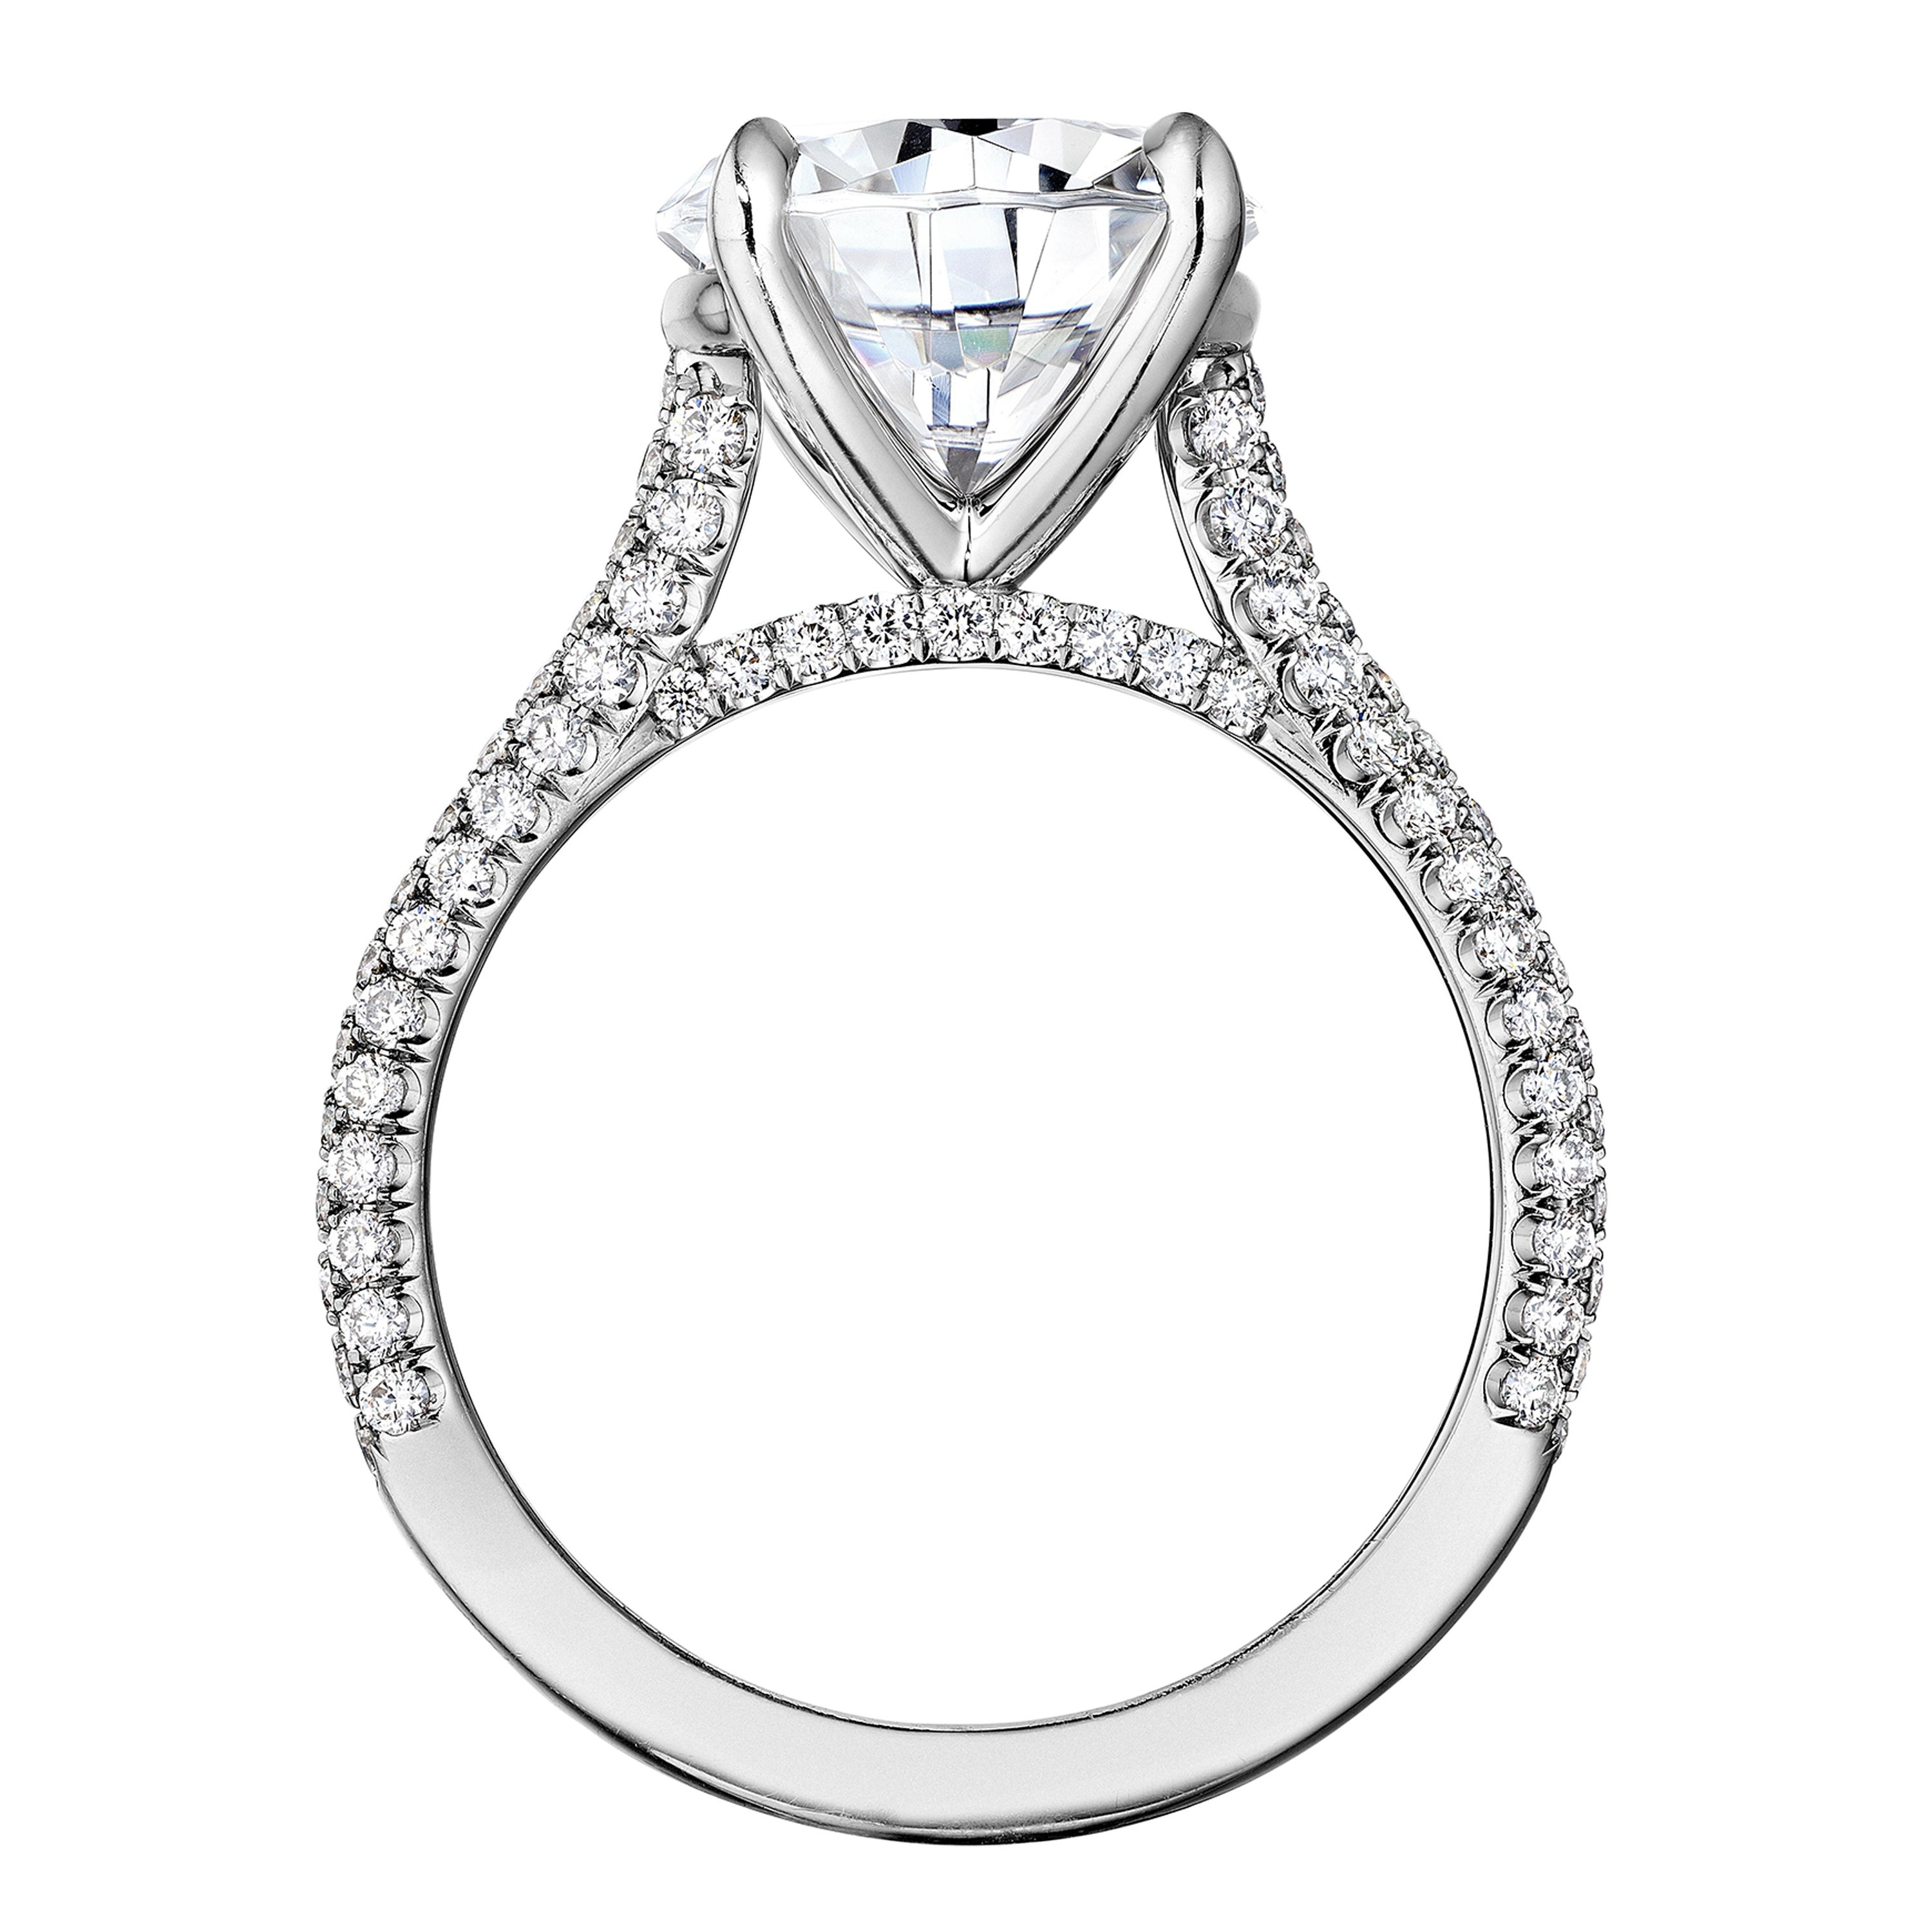 GIA Certified 3.50 Carat E VS1 Round Diamond Engagement Ring "Sabrina" For Sale